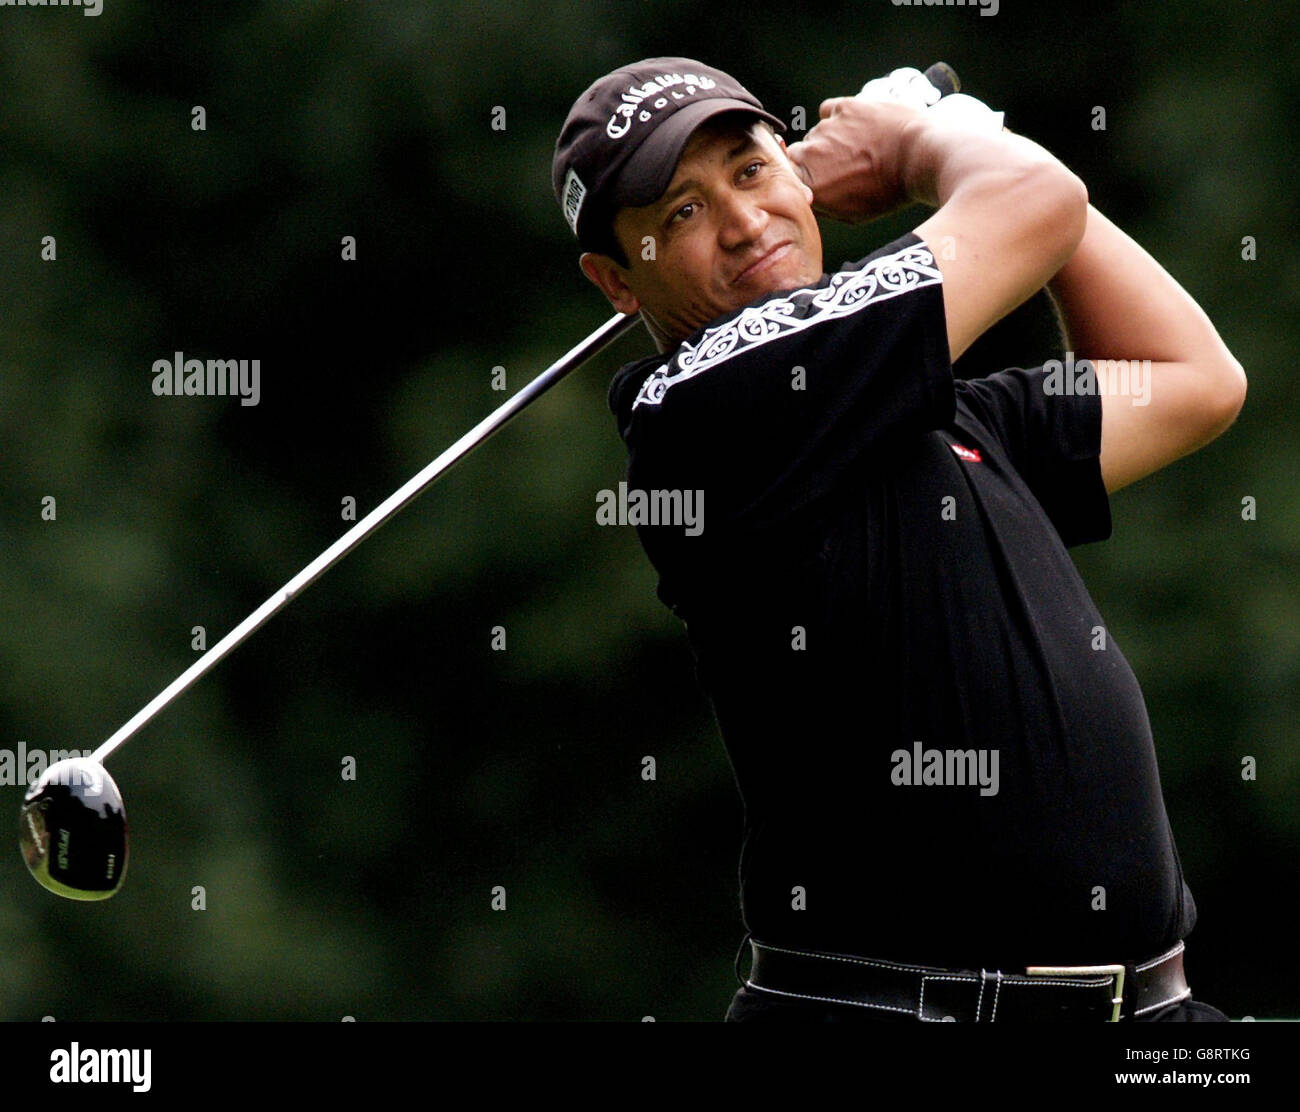 New Zealand's Michael Campbell follows the flight of his ball from the tee, during the final against Ireland's Paul McGinley on the final day of the HSBC World Match Play Championship at Wentworth, Surrey, Sunday September 18, 2005. PRESS ASSOCIATION Photo. Photo credit should read: Max Nash/PA. Stock Photo